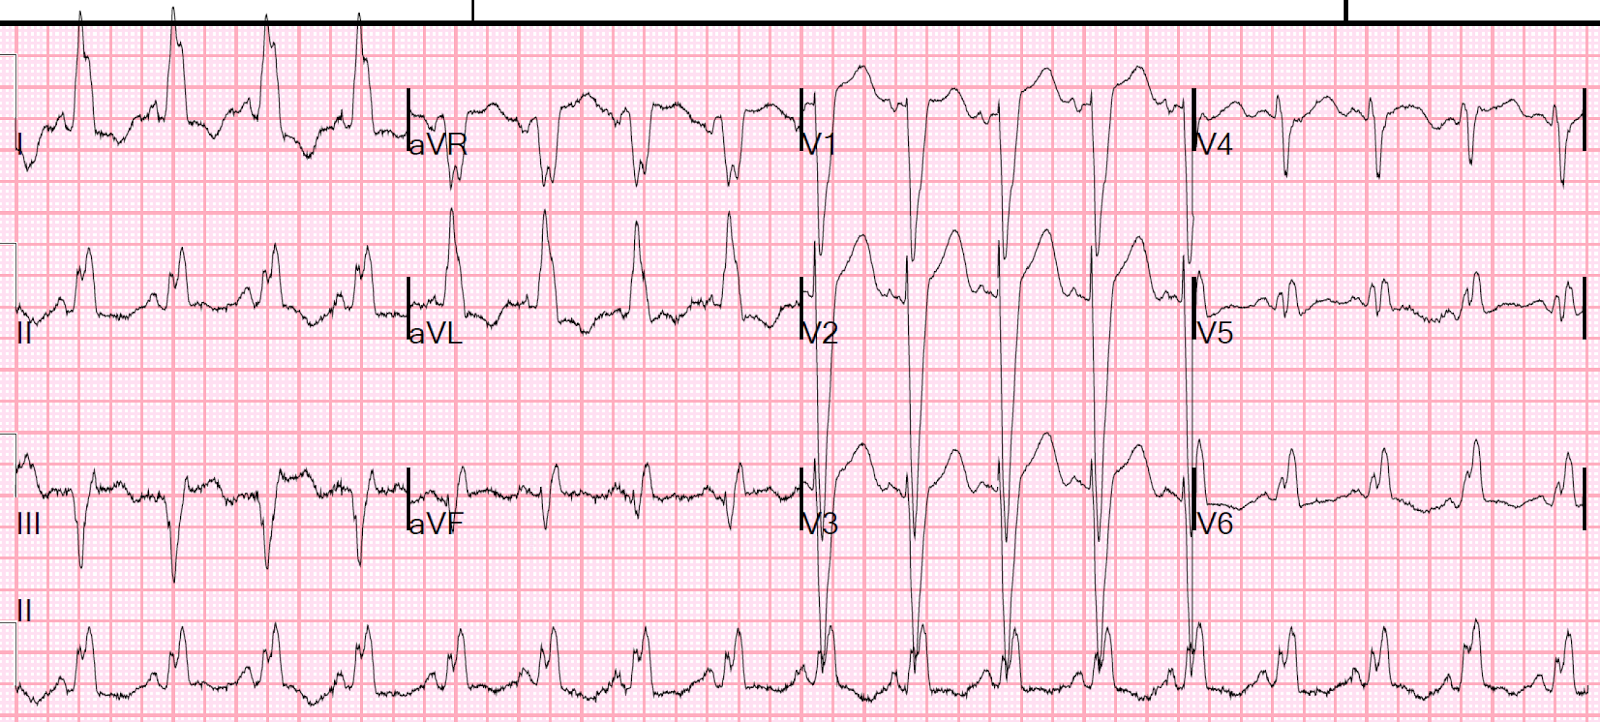 Dr Smith S Ecg Blog Wide Complex Tachycardia With Fusion And Capture Beats Not What You Think